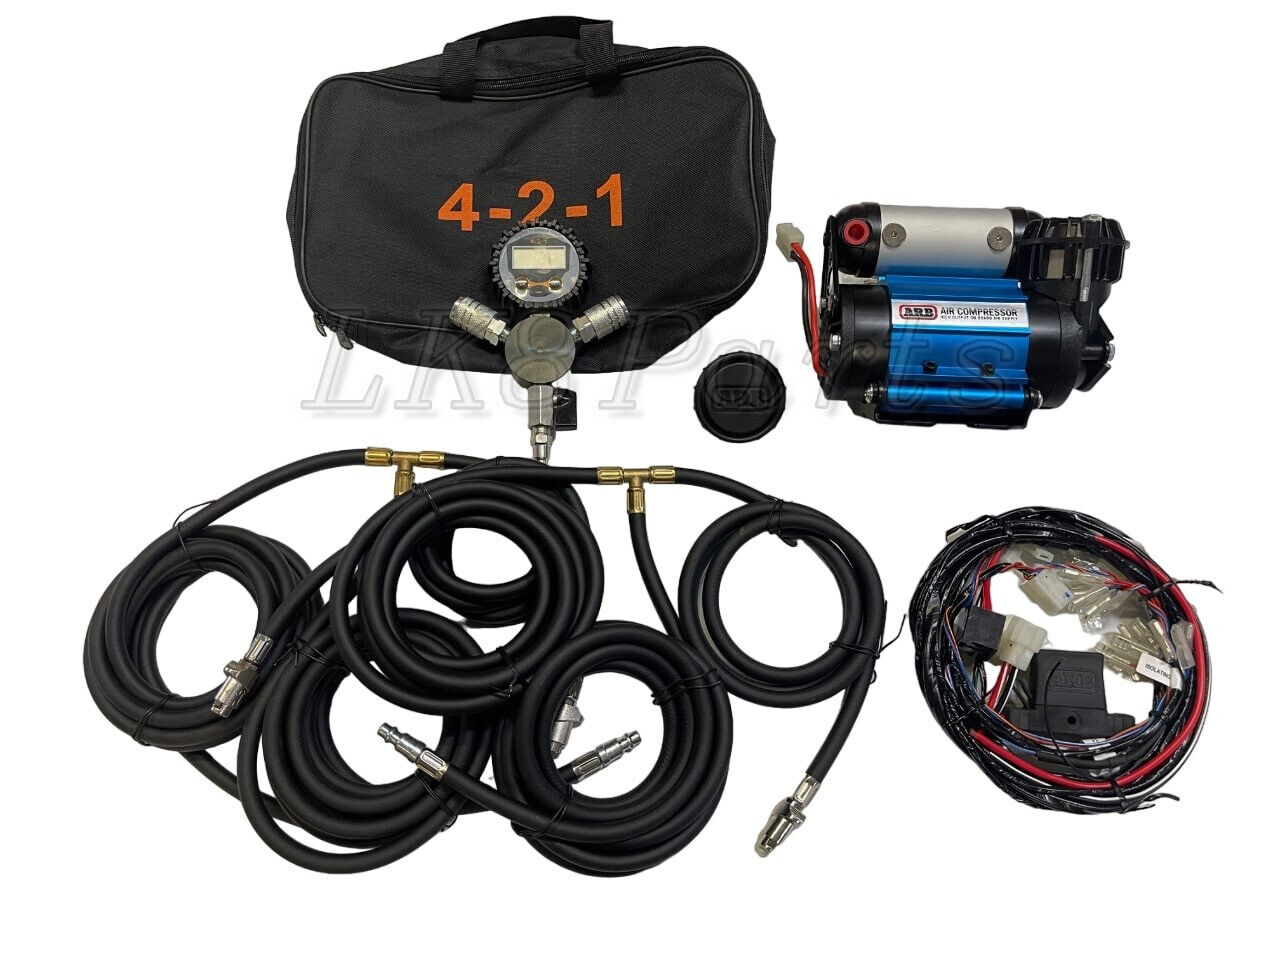 ARB CKMA12 with Rapid 4-Tire Inflation/Deflation System Kit